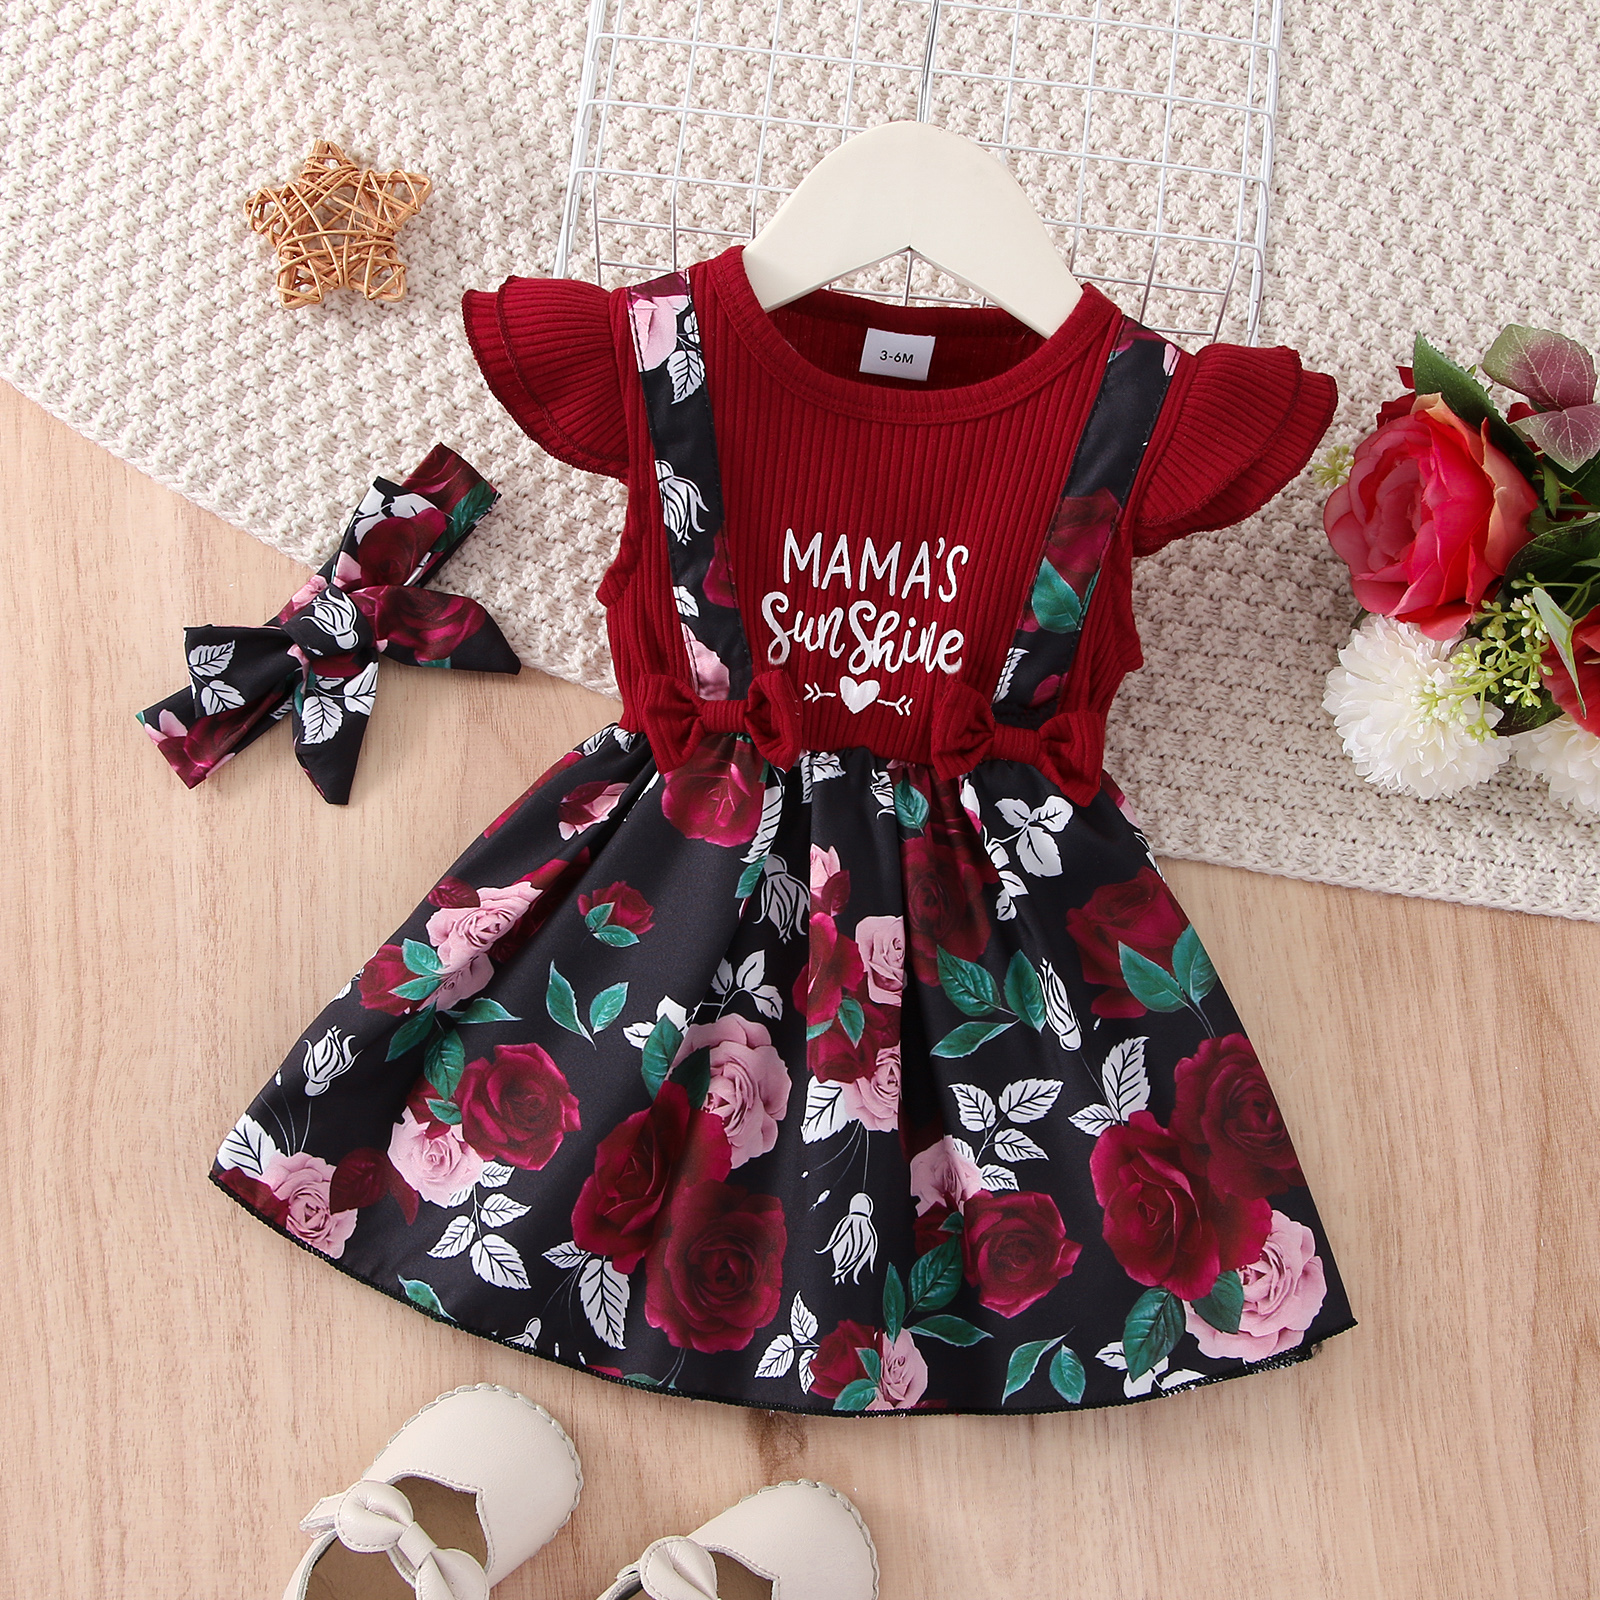 2pcs baby girl 95% cotton rib knit flutter-sleeve letter print spliced allover floral print dress with headband set